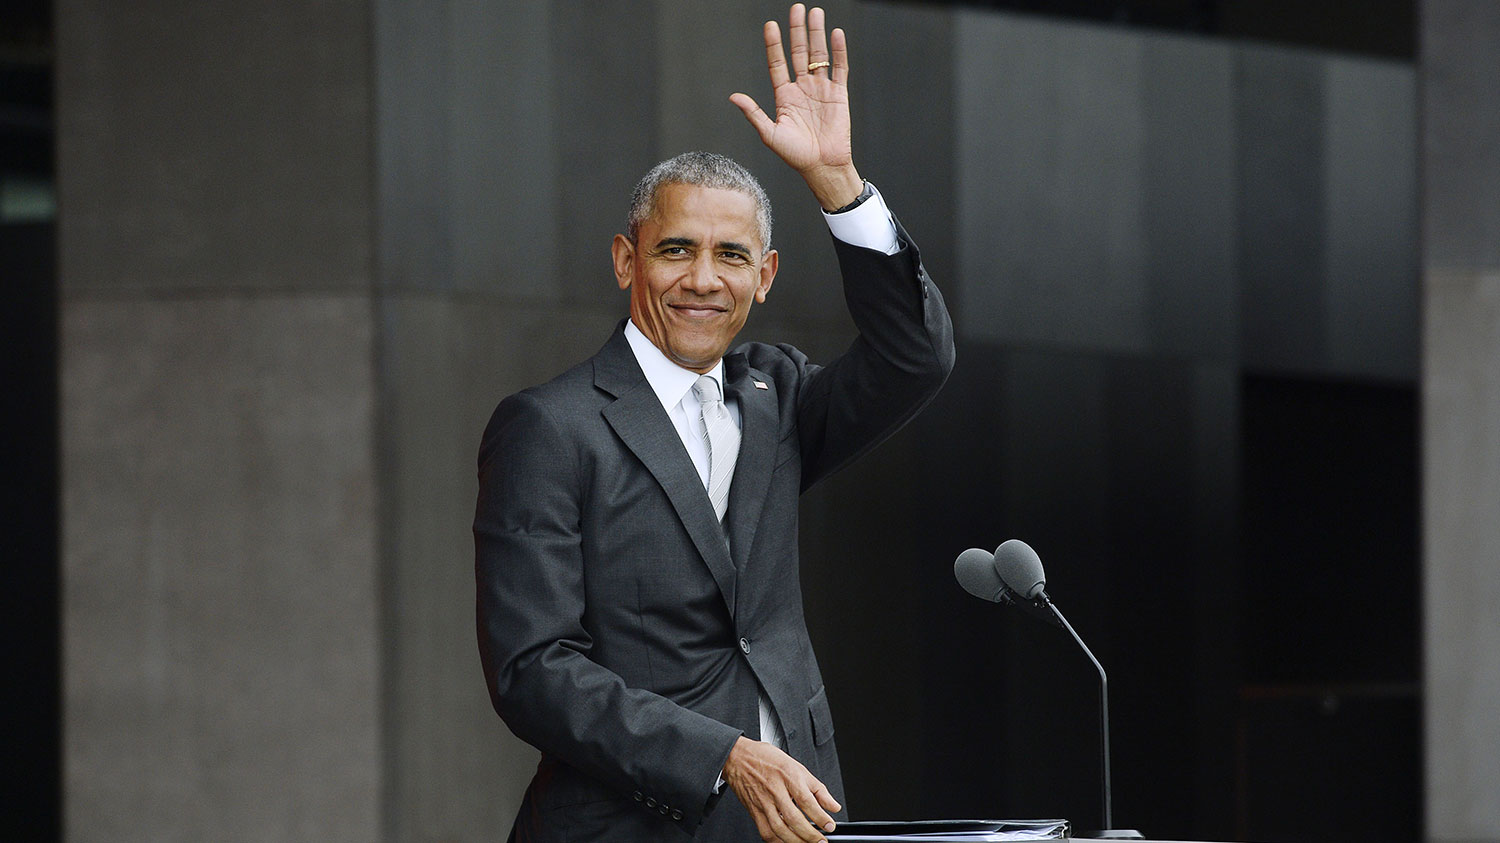 President Barack Obama speaks at the opening ceremony of the Smithsonian National Museum of African American History and Culture on Sept. 24, 2016, in Washington.
